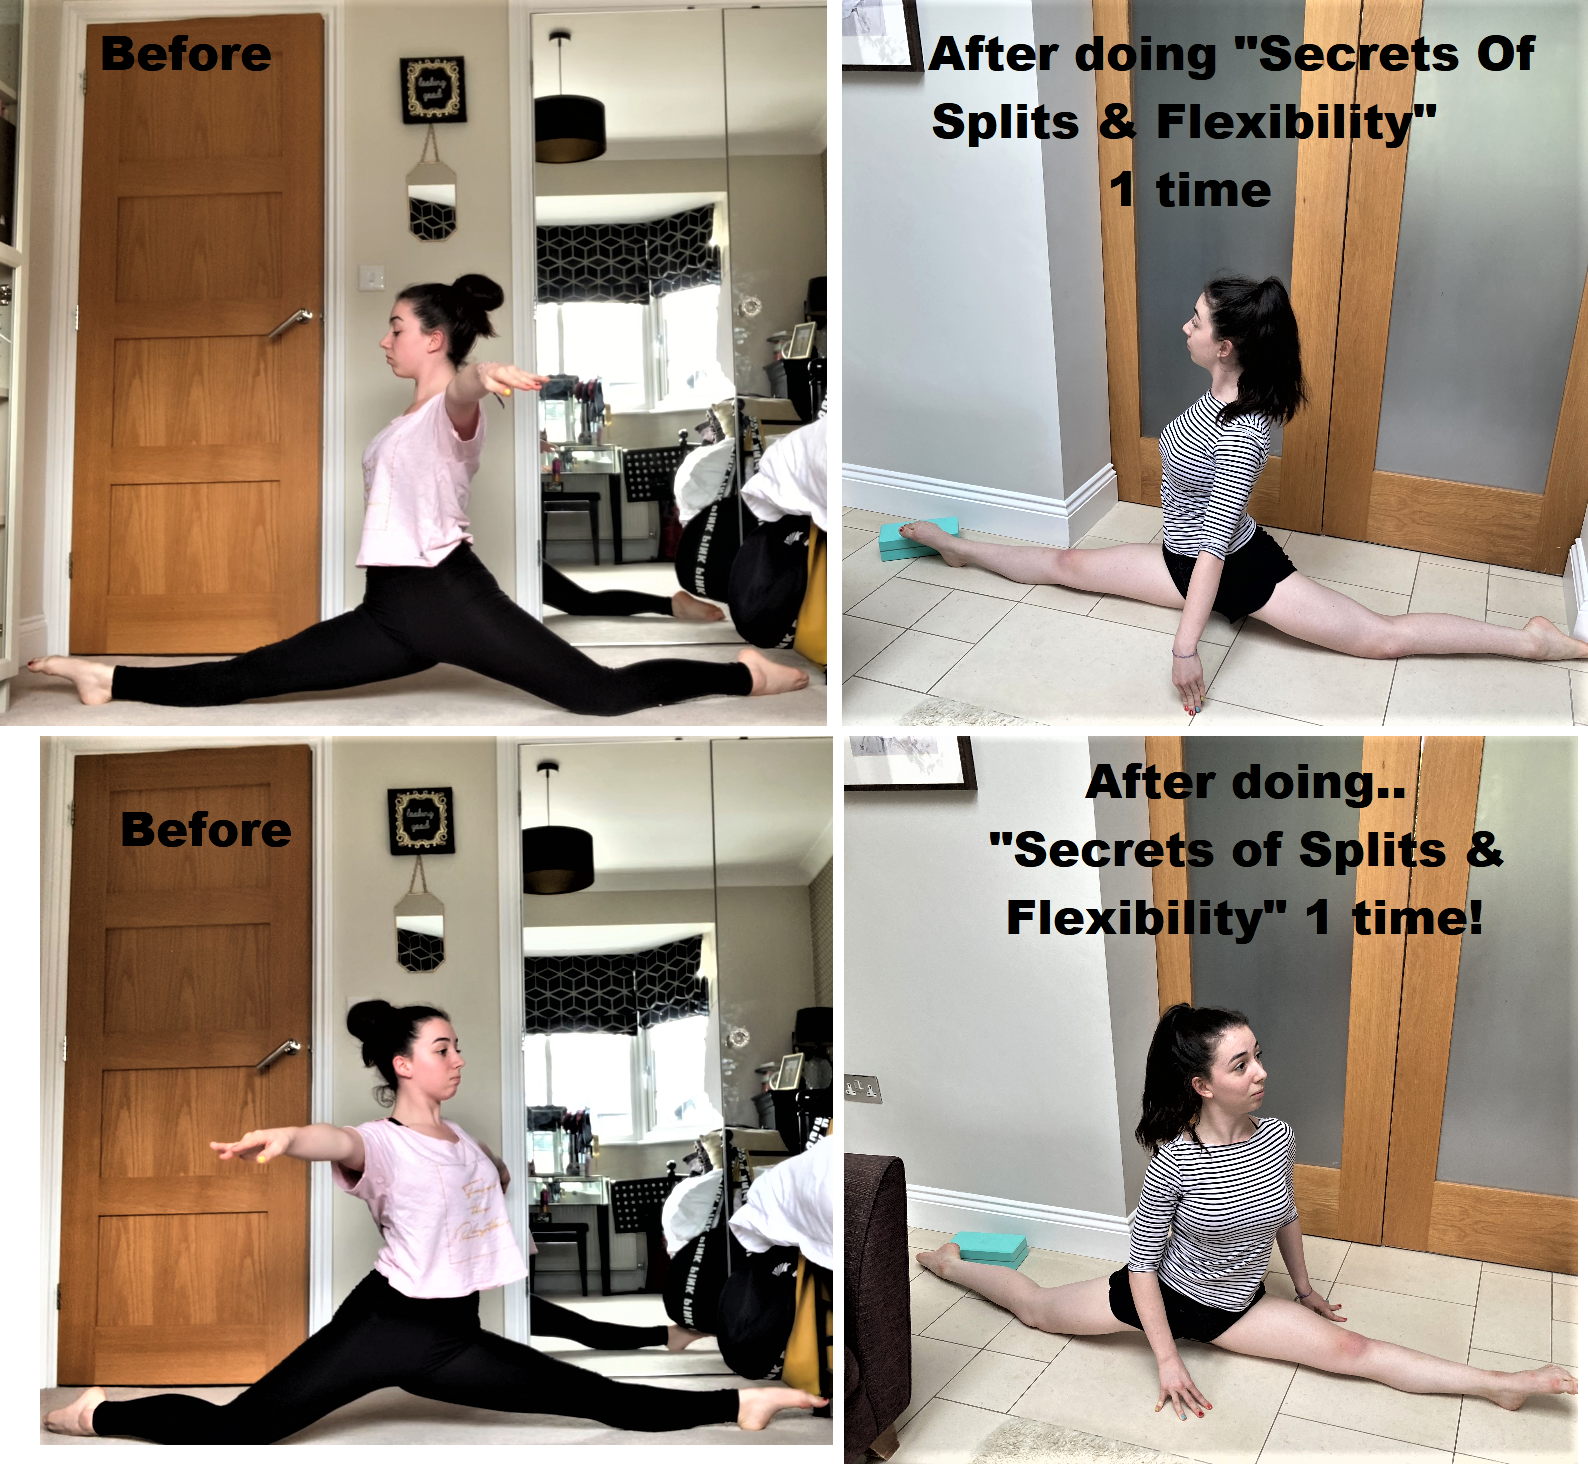 Before & after splits results after training with "Secrets of Splits & Flexibility 1 time. girl is now in full splits